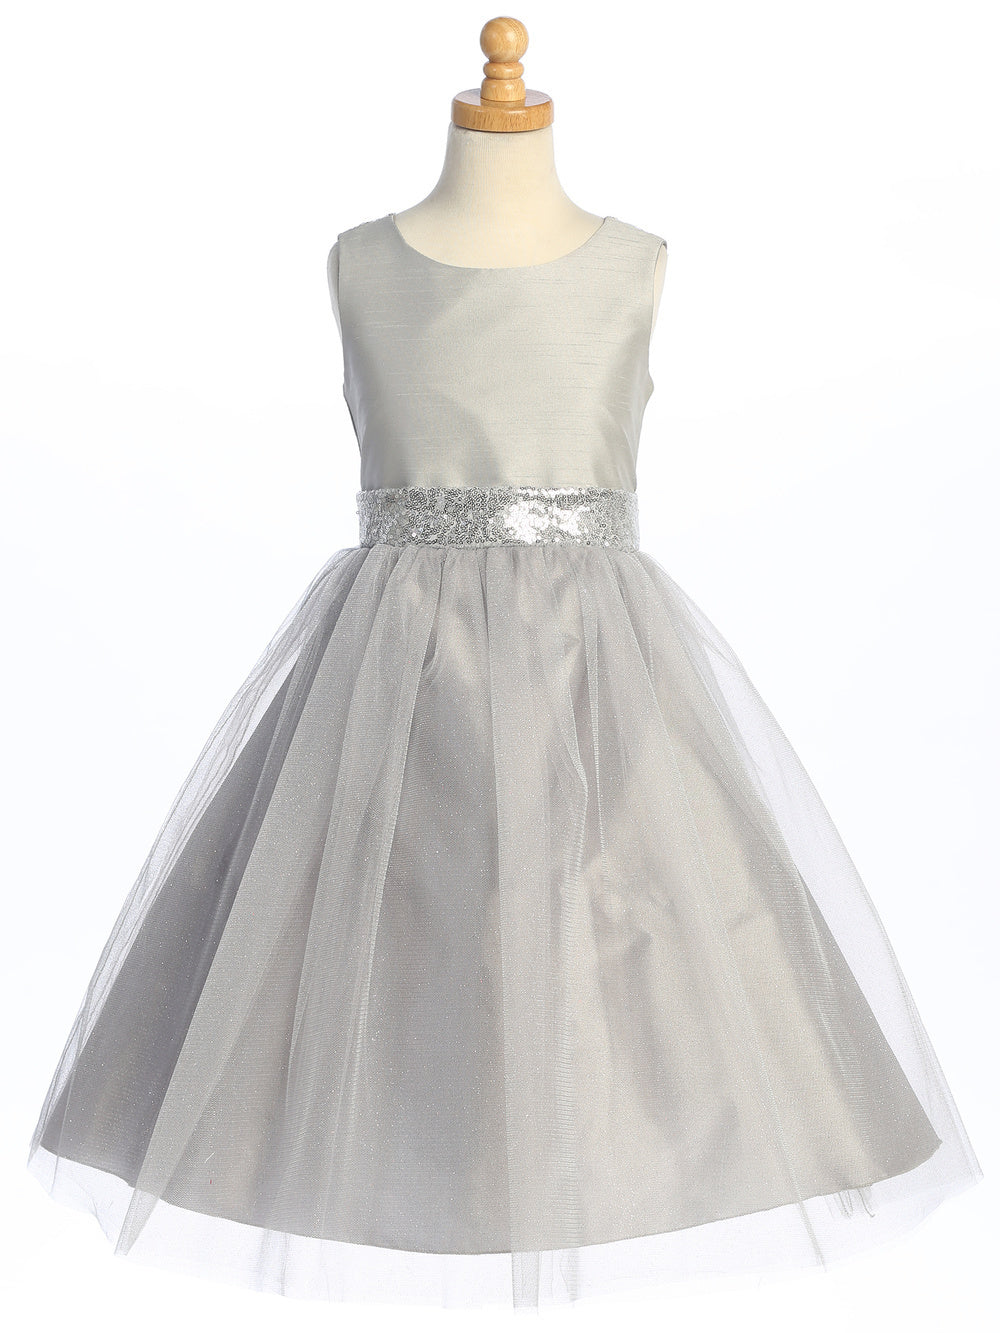 Flower girl shines in a sequined silver shantung dress with glimmering tulle.